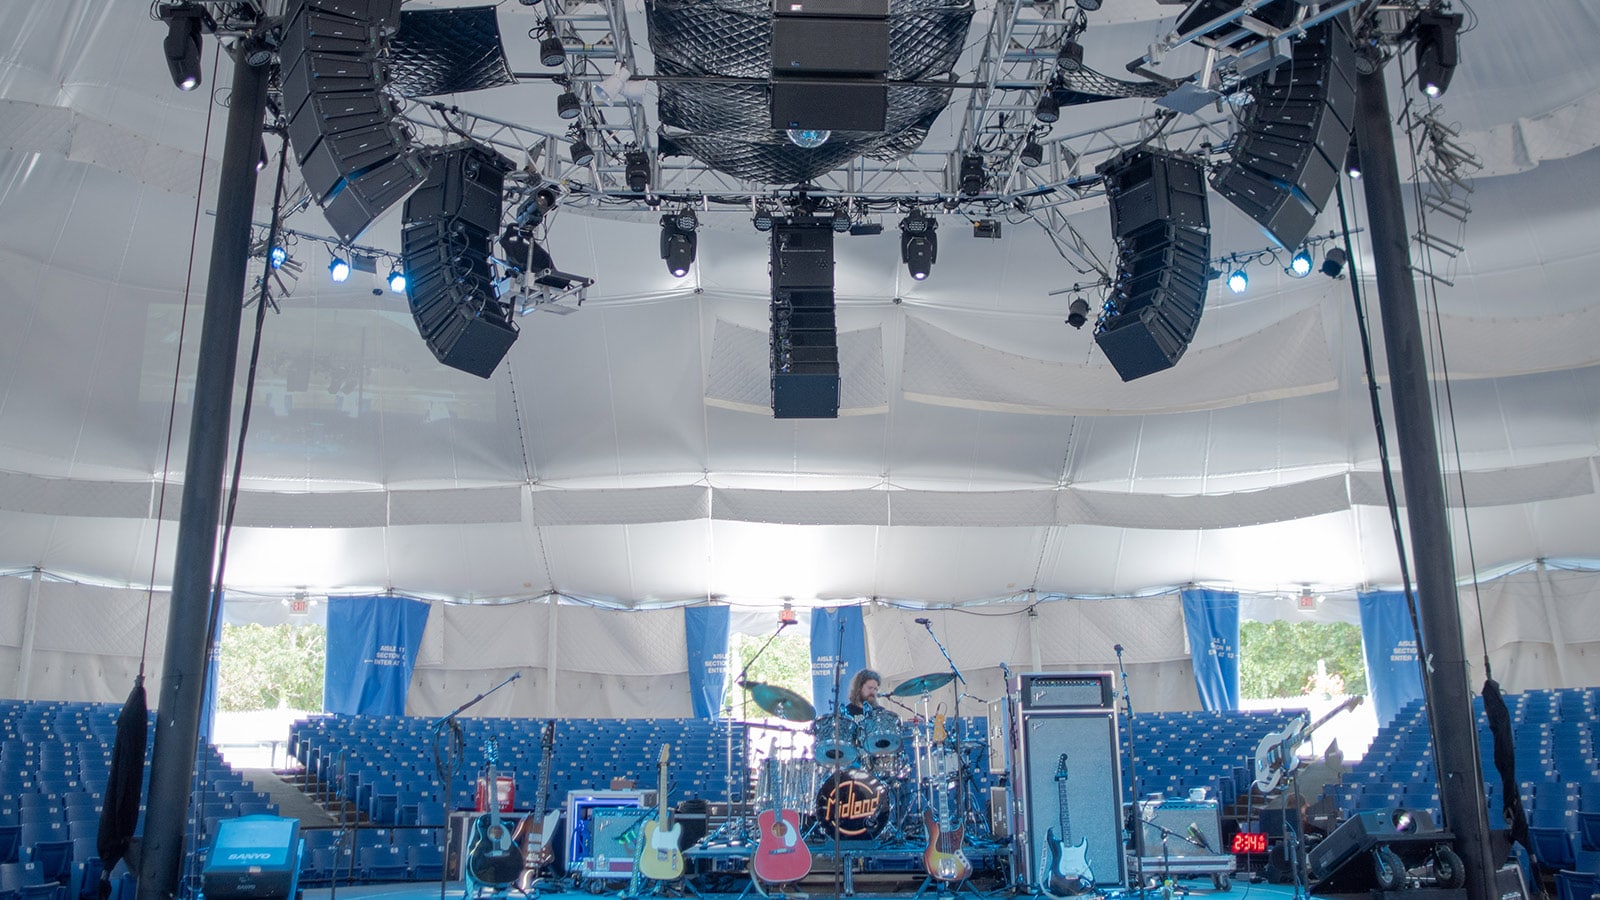 Cape Cod Melody Tent Thrives with Meyer Sound LEOPARD